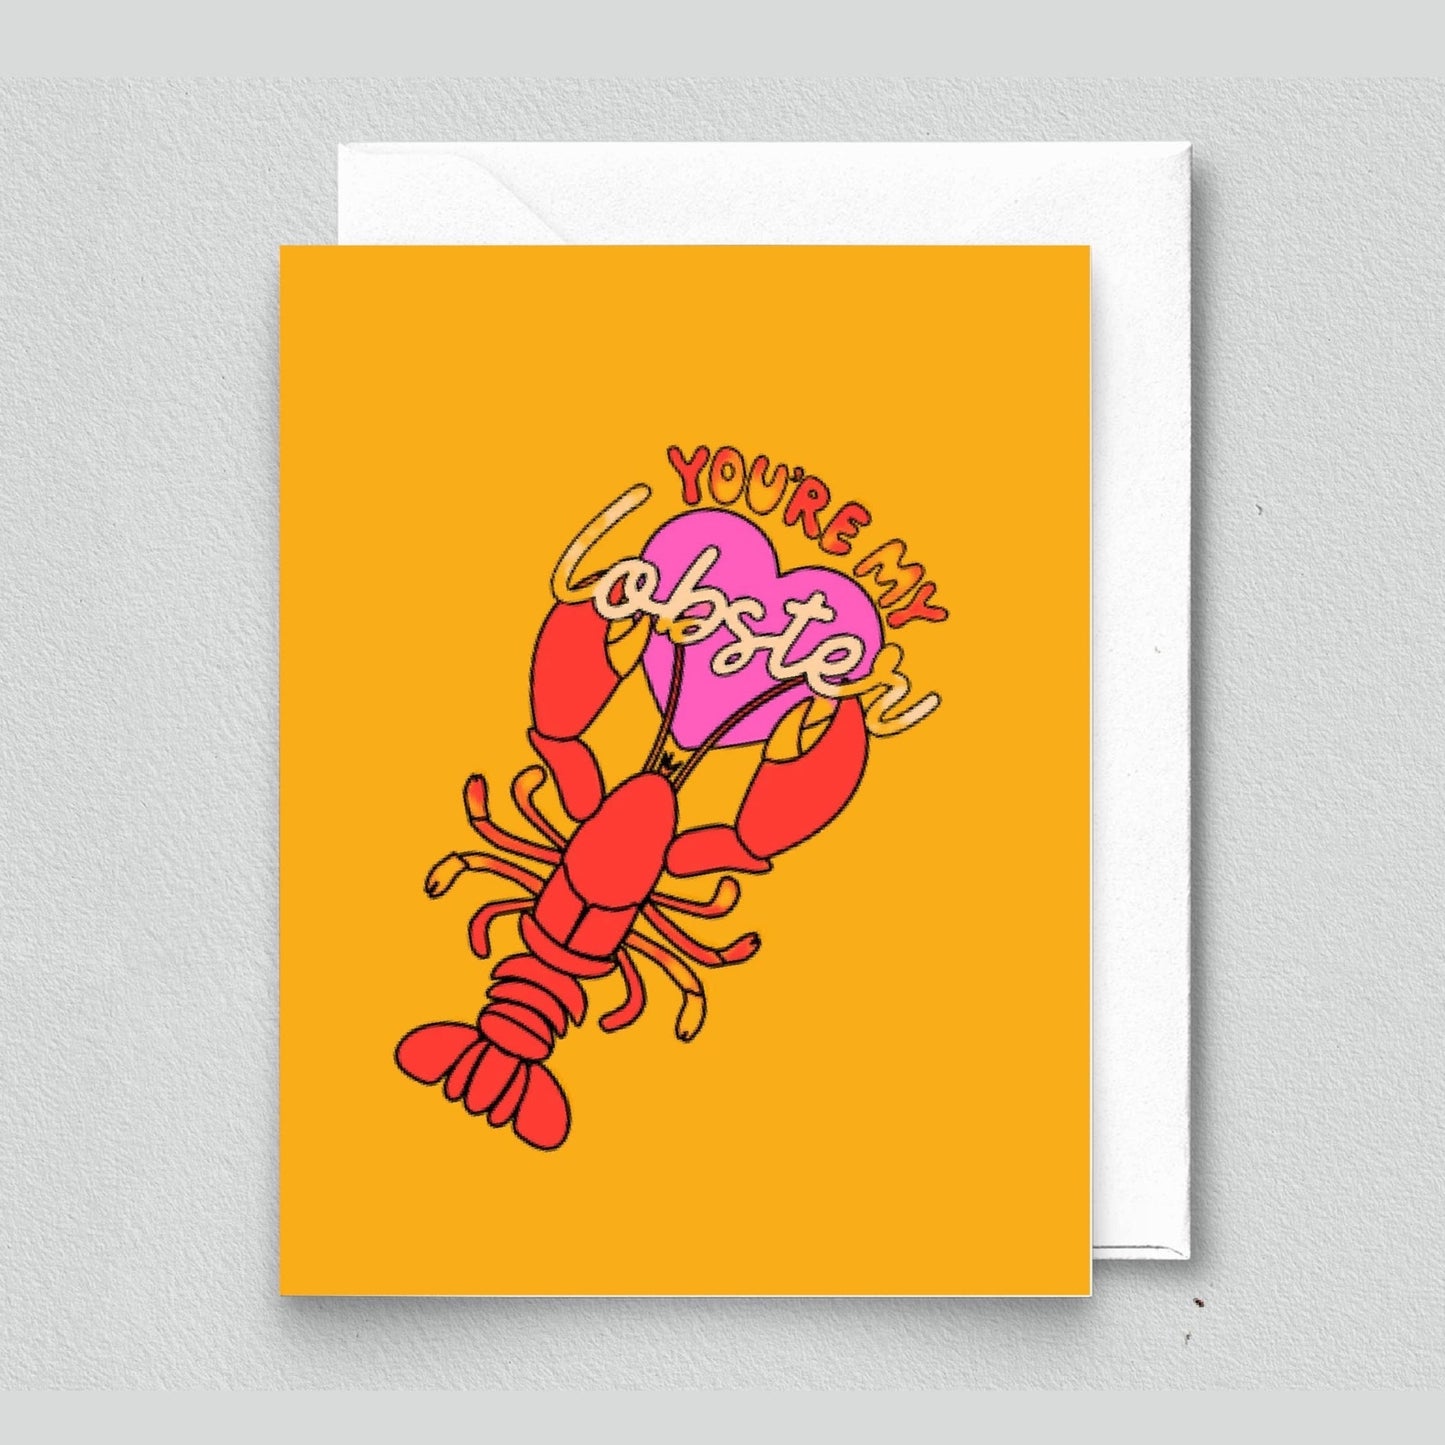 You’re My Lobster Card